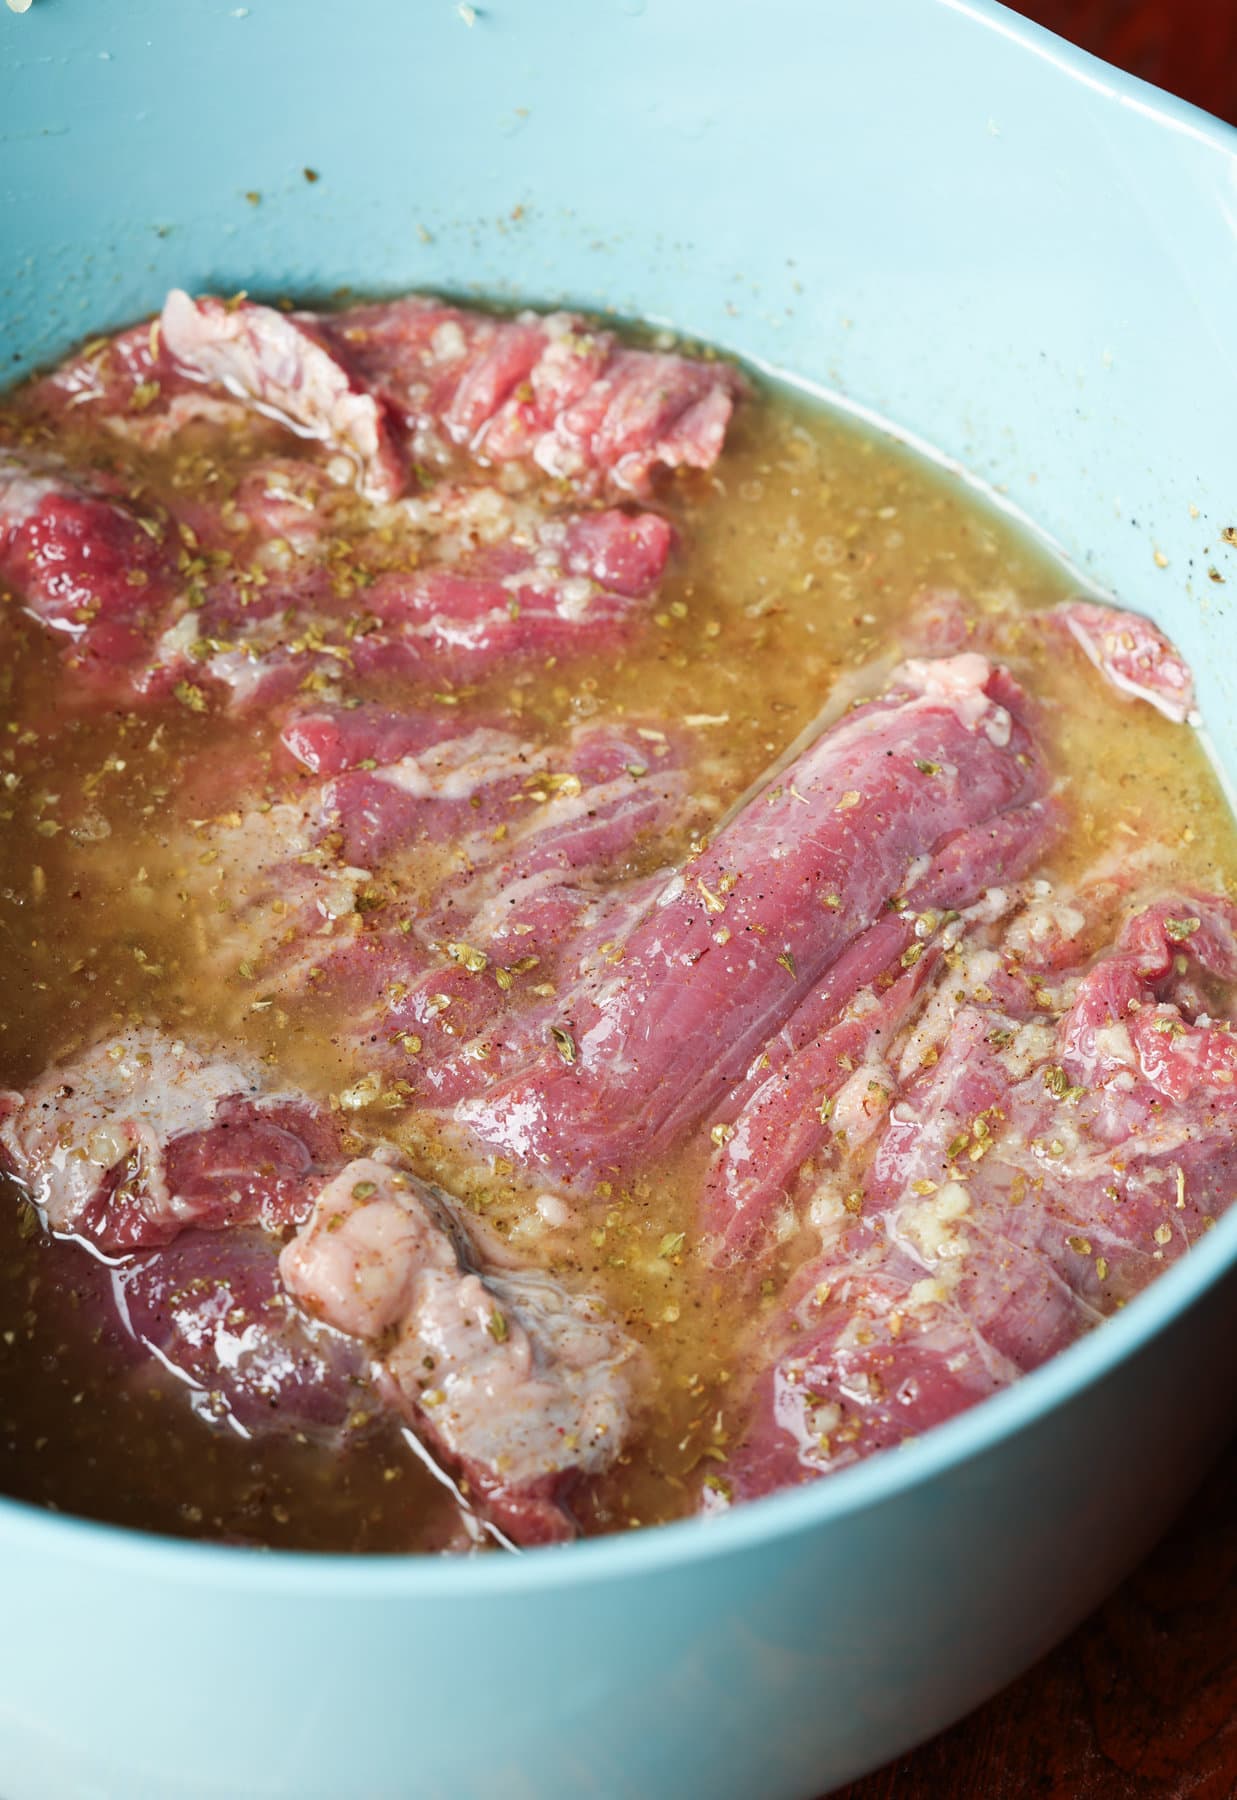 marinating skirt steak in a large blue bowl